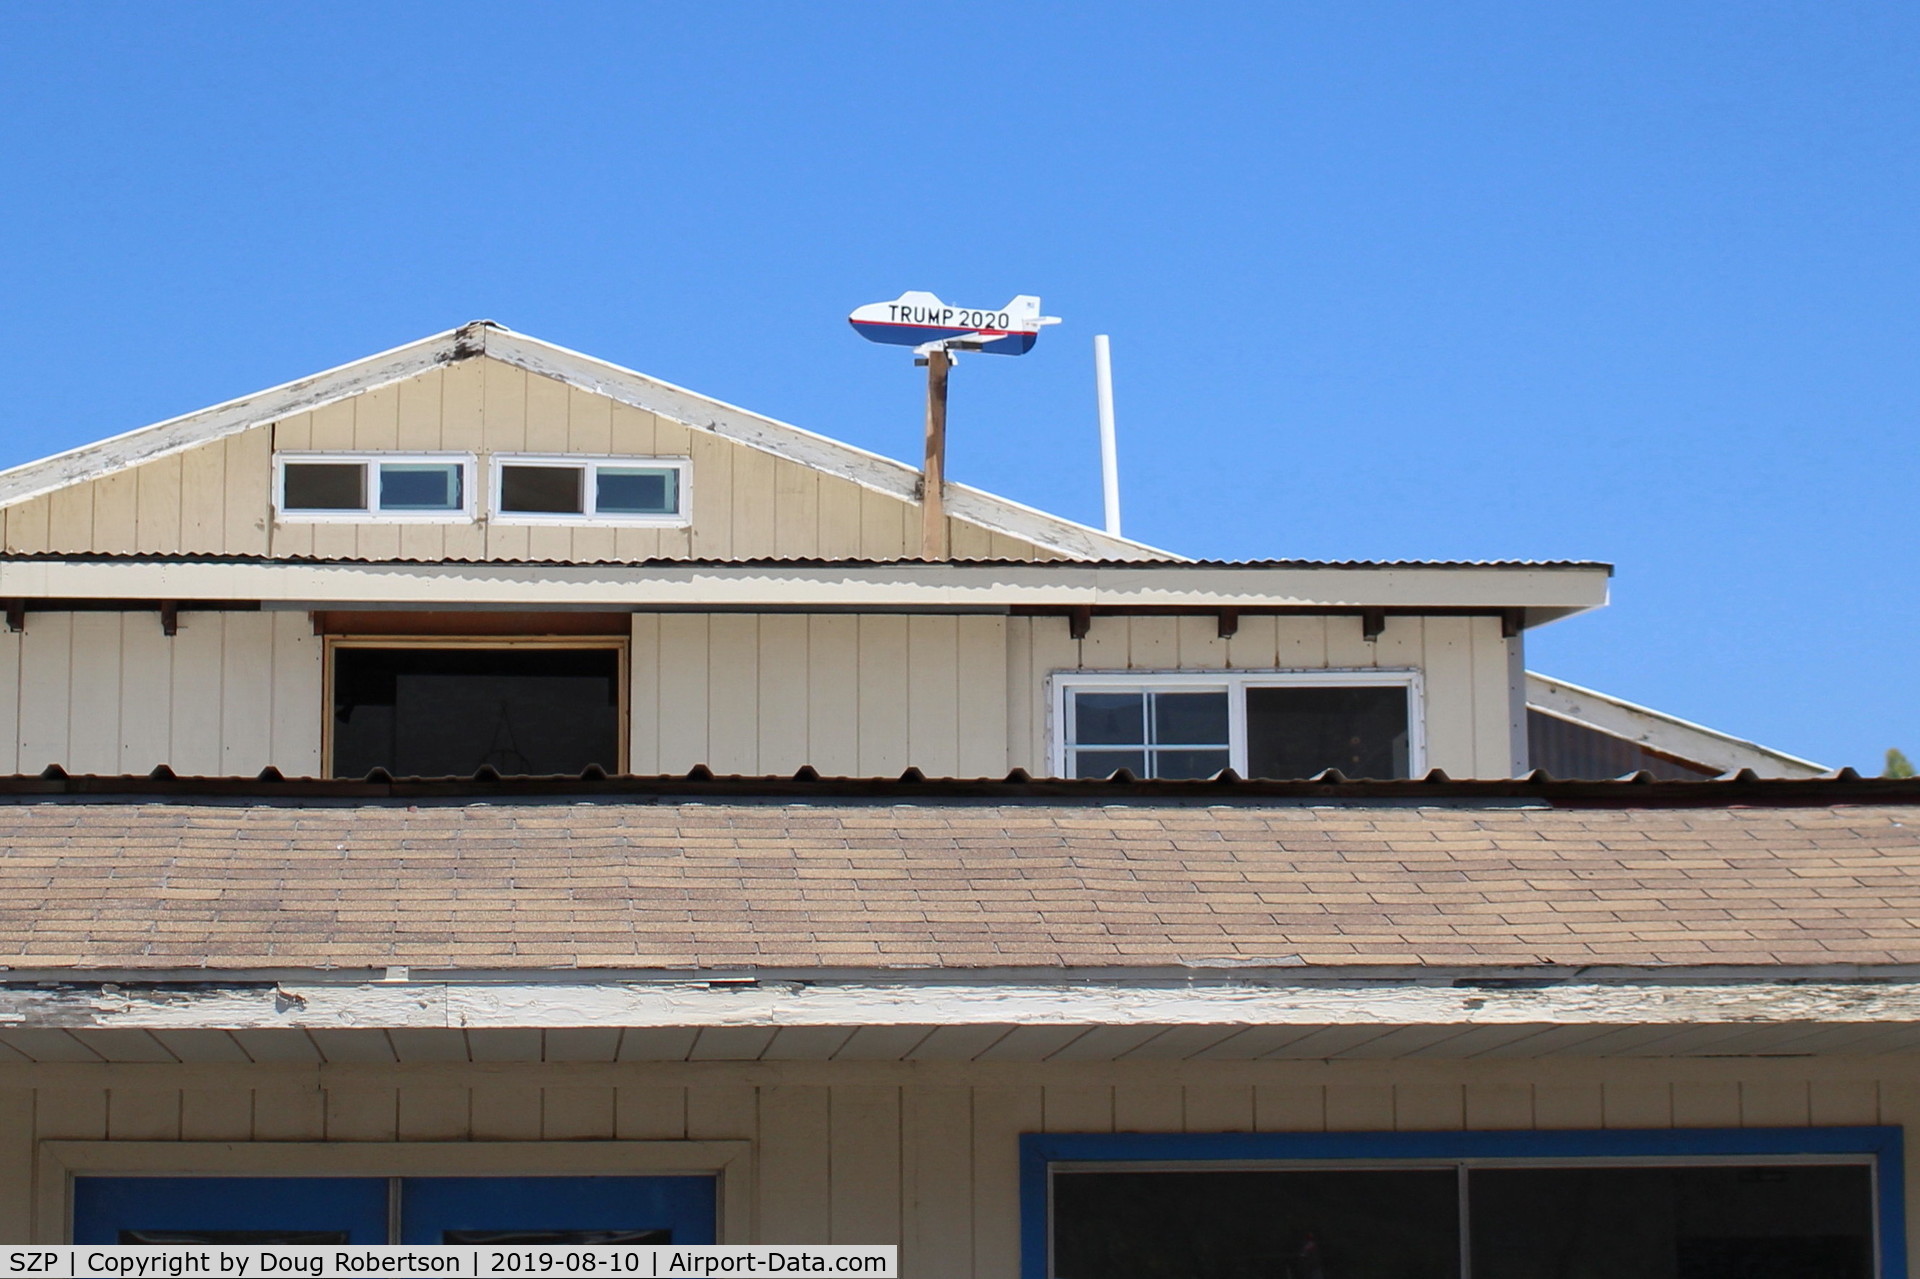 Santa Paula Airport (SZP) - Recent New Wind Tee, (of sorts), also a vision test-can you see 20 20?